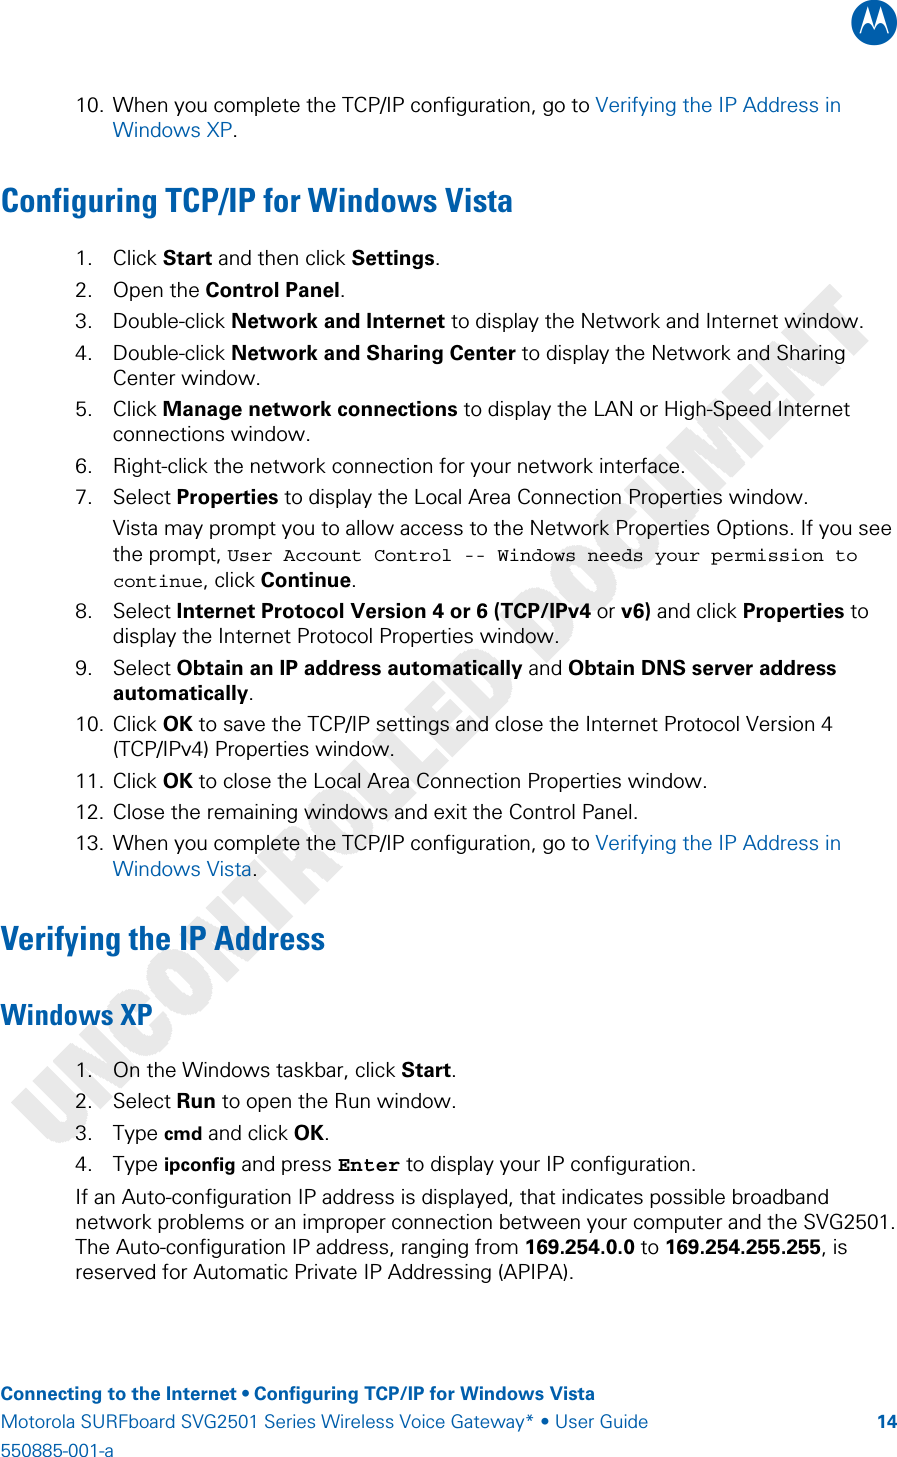 B    Connecting to the Internet • Configuring TCP/IP for Windows Vista Motorola SURFboard SVG2501 Series Wireless Voice Gateway* • User Guide  14550885-001-a   10. When you complete the TCP/IP configuration, go to Verifying the IP Address in Windows XP. Configuring TCP/IP for Windows Vista 1. Click Start and then click Settings. 2. Open the Control Panel. 3. Double-click Network and Internet to display the Network and Internet window. 4. Double-click Network and Sharing Center to display the Network and Sharing Center window. 5. Click Manage network connections to display the LAN or High-Speed Internet connections window. 6. Right-click the network connection for your network interface. 7. Select Properties to display the Local Area Connection Properties window. Vista may prompt you to allow access to the Network Properties Options. If you see the prompt, User Account Control -- Windows needs your permission to continue, click Continue. 8. Select Internet Protocol Version 4 or 6 (TCP/IPv4 or v6) and click Properties to display the Internet Protocol Properties window. 9. Select Obtain an IP address automatically and Obtain DNS server address automatically. 10. Click OK to save the TCP/IP settings and close the Internet Protocol Version 4 (TCP/IPv4) Properties window. 11. Click OK to close the Local Area Connection Properties window. 12. Close the remaining windows and exit the Control Panel. 13. When you complete the TCP/IP configuration, go to Verifying the IP Address in Windows Vista. Verifying the IP Address Windows XP 1. On the Windows taskbar, click Start.  2. Select Run to open the Run window. 3. Type cmd and click OK. 4. Type ipconfig and press Enter to display your IP configuration.  If an Auto-configuration IP address is displayed, that indicates possible broadband network problems or an improper connection between your computer and the SVG2501. The Auto-configuration IP address, ranging from 169.254.0.0 to 169.254.255.255, is reserved for Automatic Private IP Addressing (APIPA). 